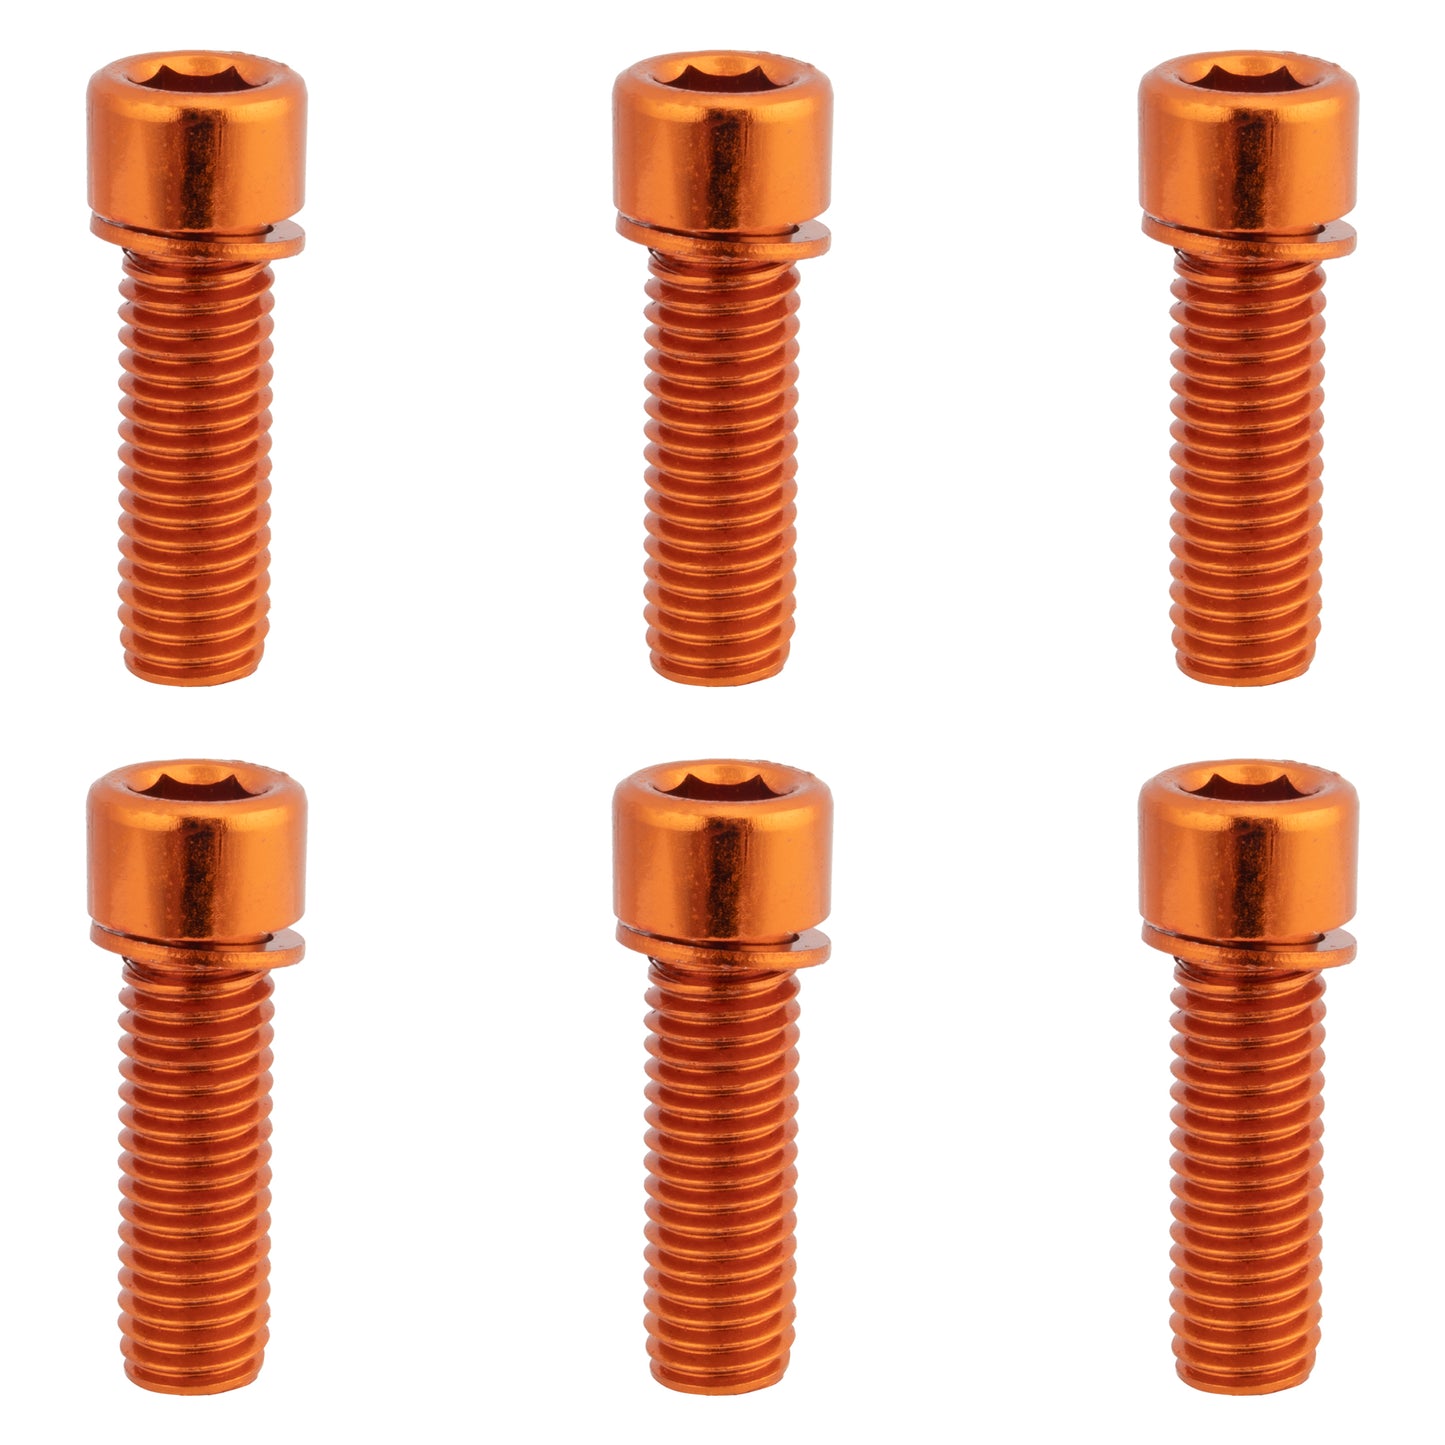 Shadow Hollow Bolts Kit (Pack of 6)